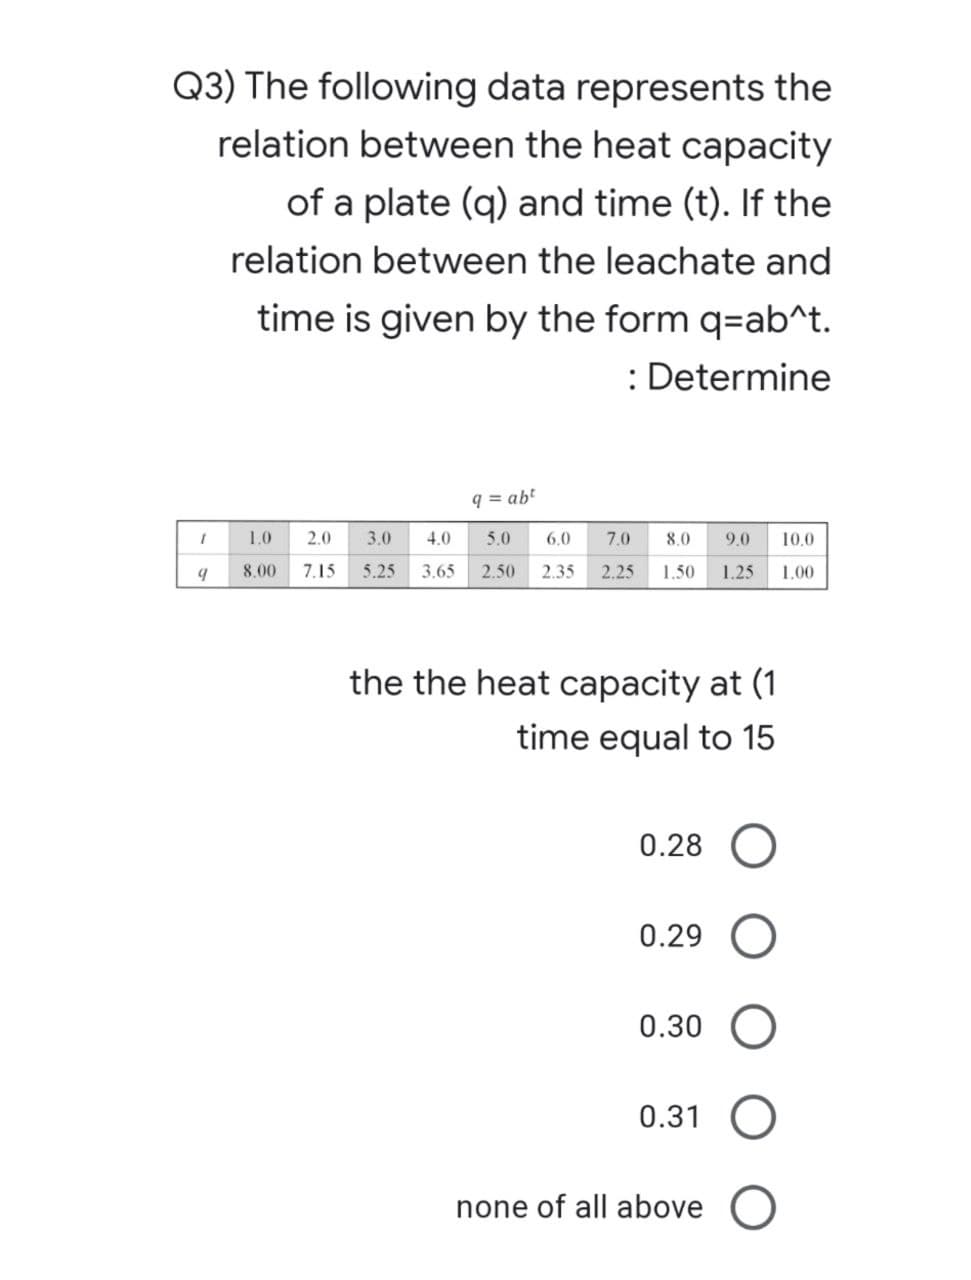 Q3) The following data represents the
relation between the heat capacity
of a plate (q) and time (t). If the
relation between the leachate and
time is given by the form q=ab^t.
: Determine
9 = abt
1.0
2.0
3.0
4.0
5.0
6.0
7.0
8.0
9.0
10.0
8.00
7.15
5.25
3.65
2.50
2.35
2.25
1.50
1.25
1.00
the the heat capacity at (1
time equal to 15
0.28 O
0.29
0.30
0.31 O
none of all above O
